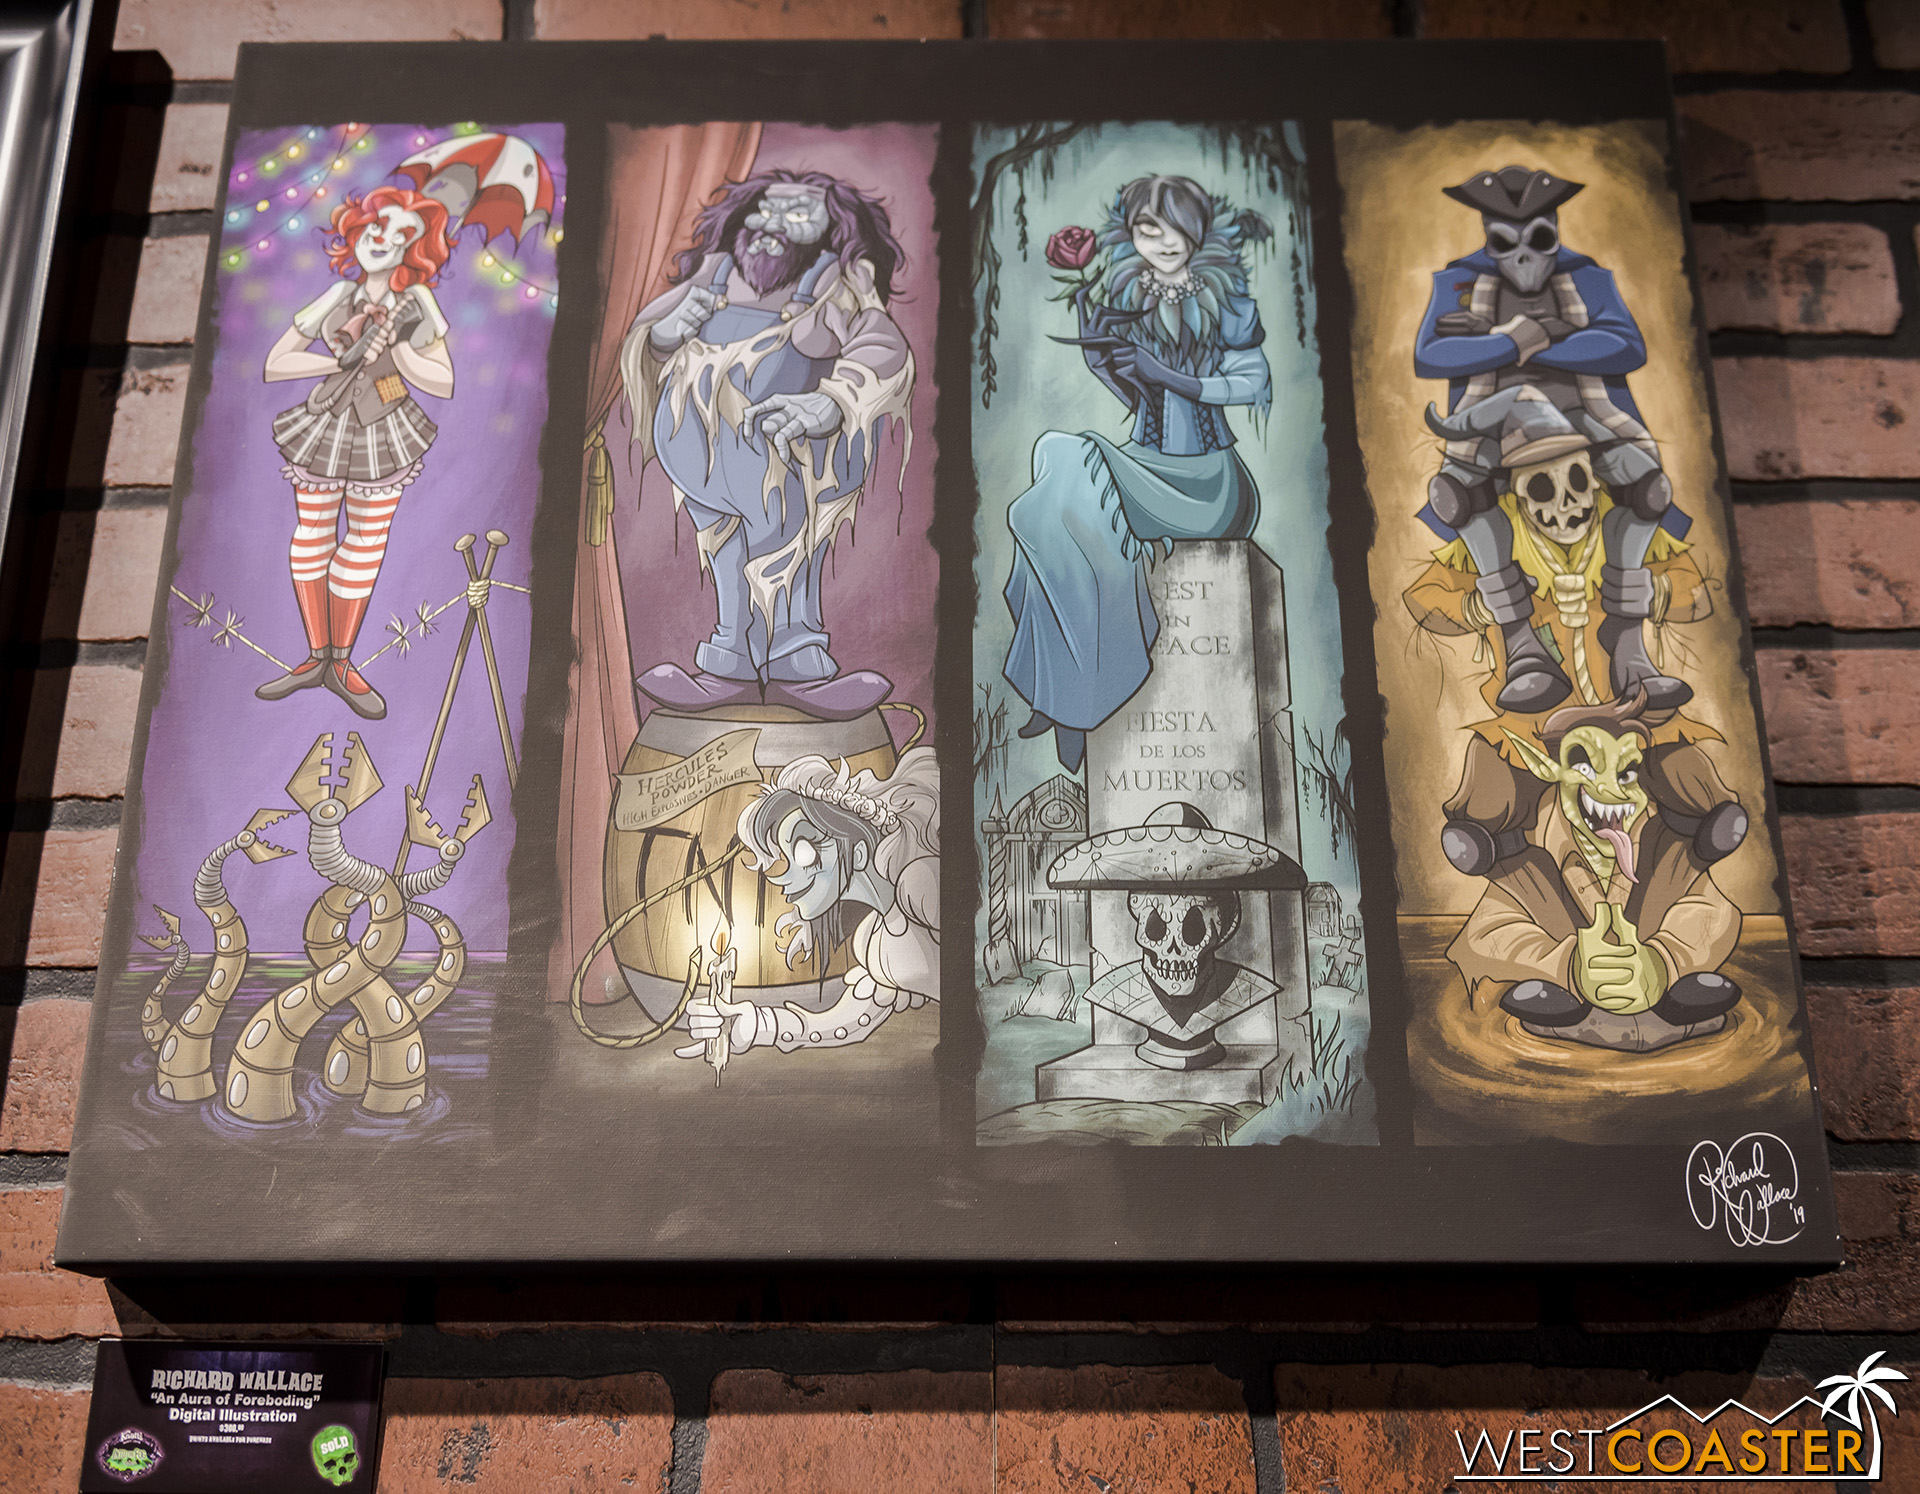  This Haunted Mansion-inspired piece is incredible. So many details and cute references! 